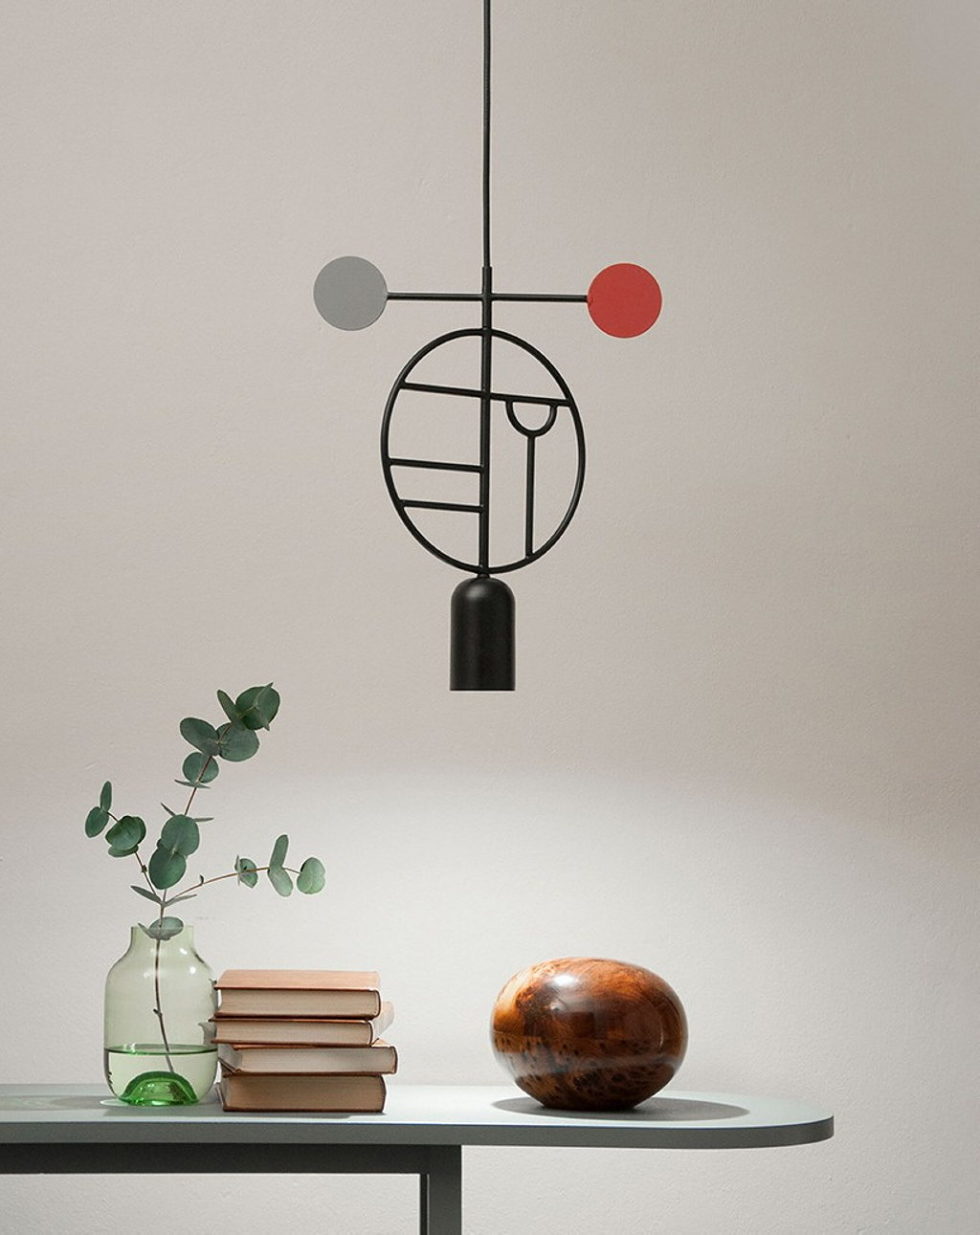 Minimalist pendant lamps Lines & Dots from Goula Figuera studio 2